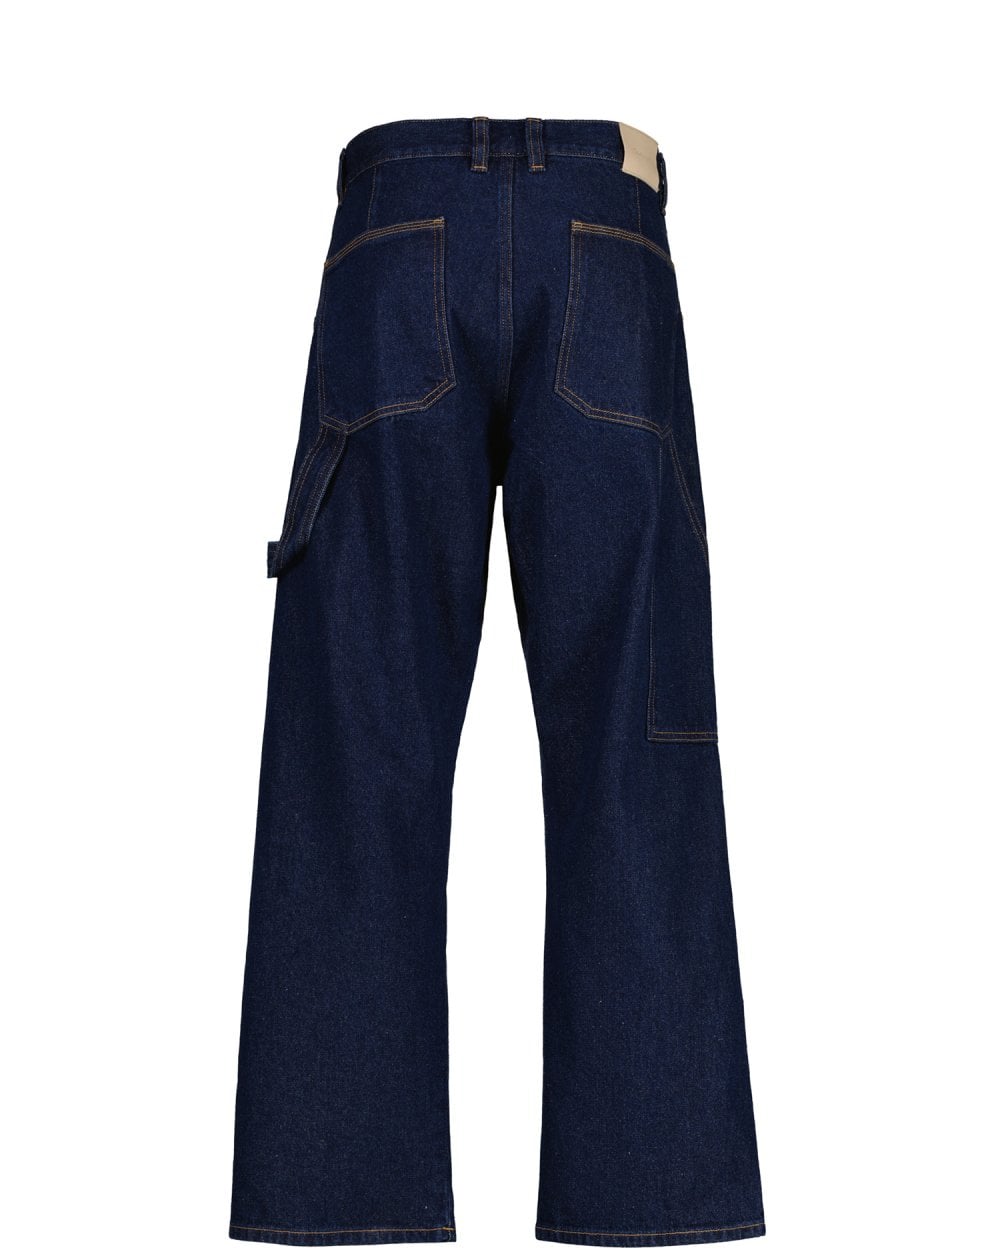 Regular Fit Workers Jeans